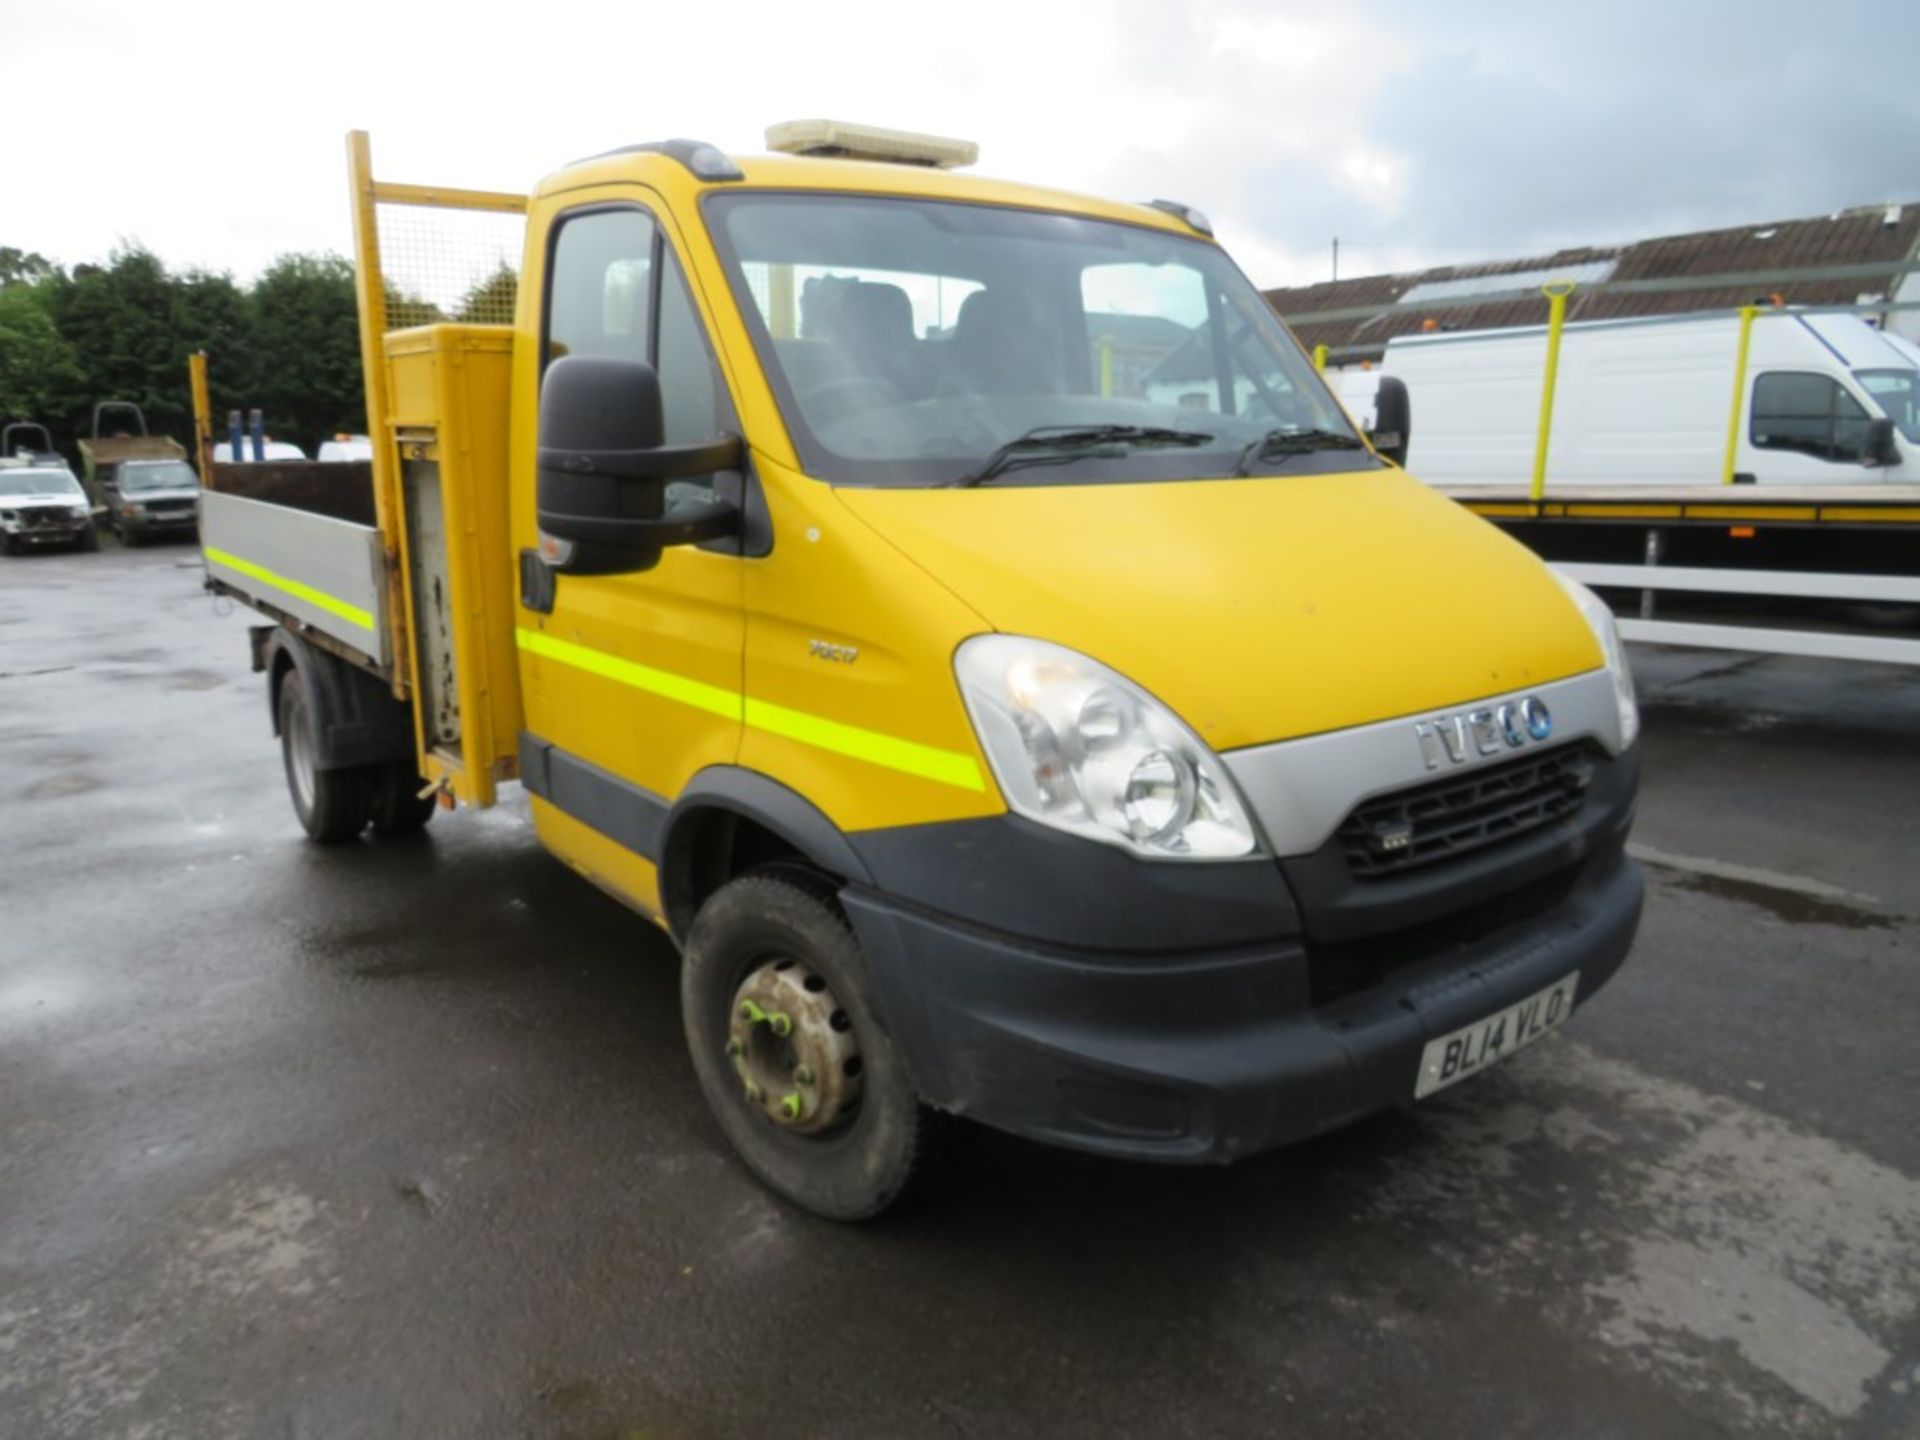 14 reg IVECO DAILY 70C17 TIPPER (DIRECT COUNCIL) 1ST REG 08/14, TEST 07/20, 87000KM, V5 HERE, 1